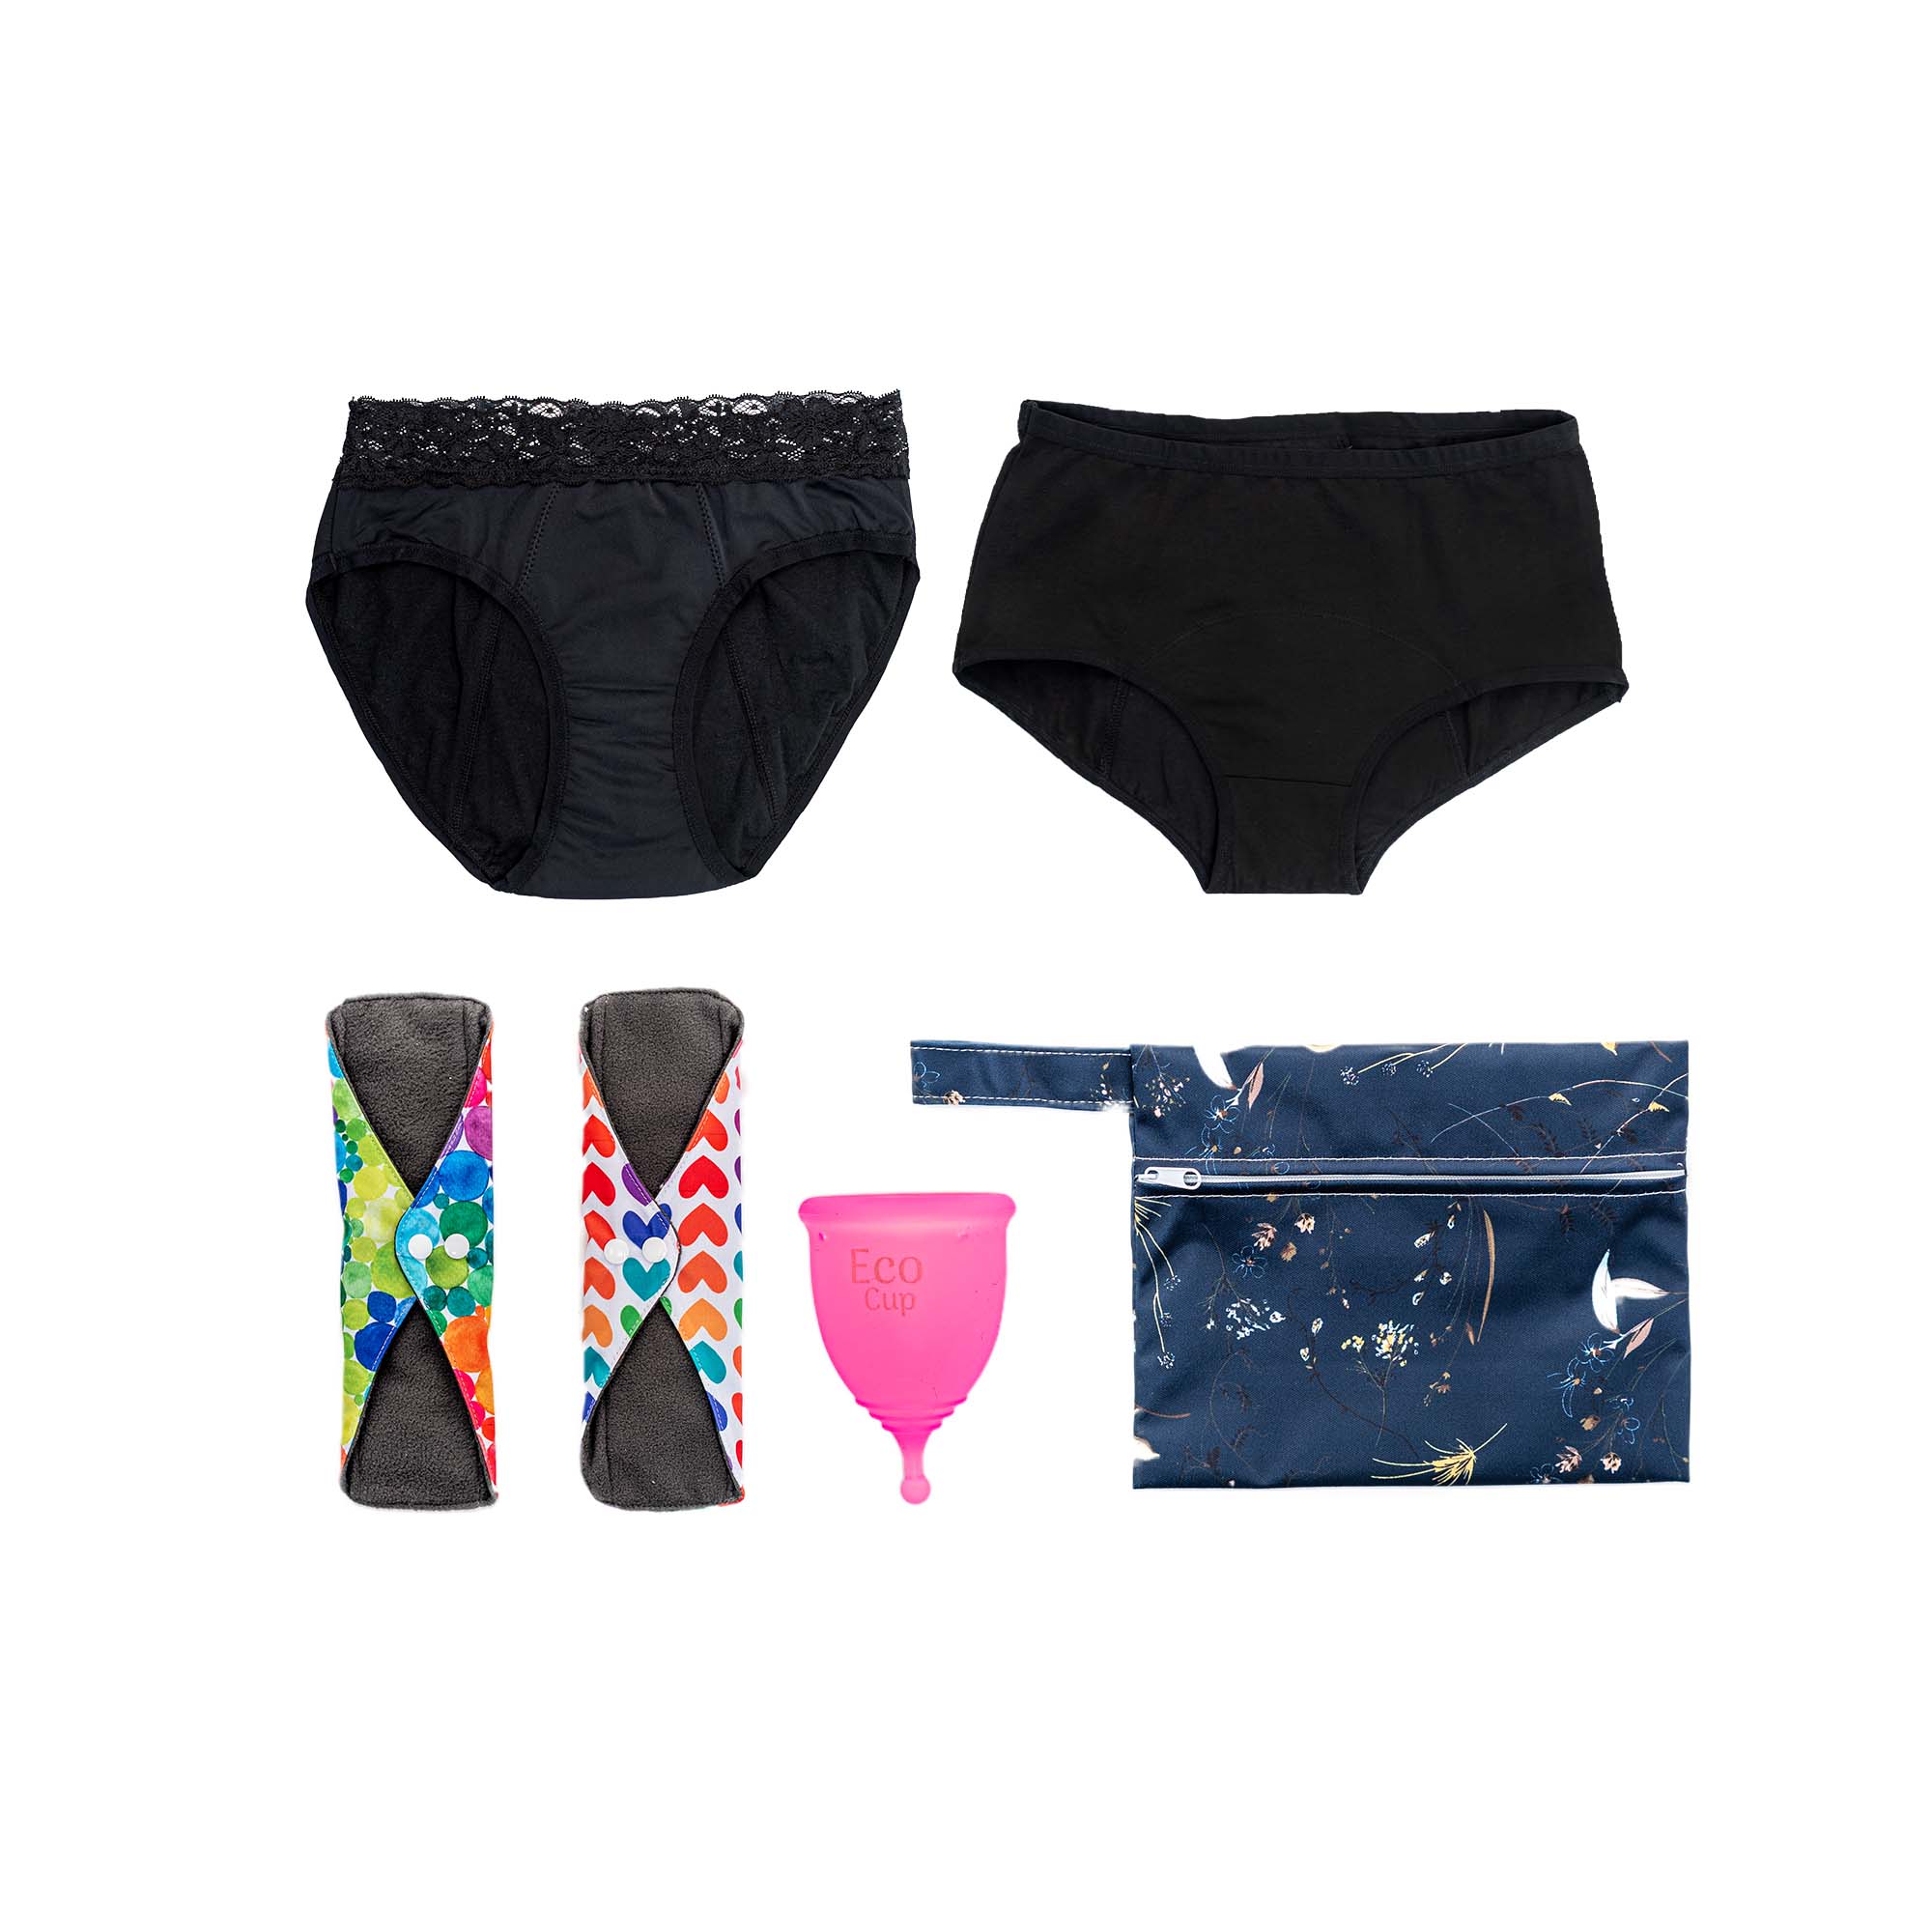 Period Underwear and Menstrual Cup Packs and Bundles